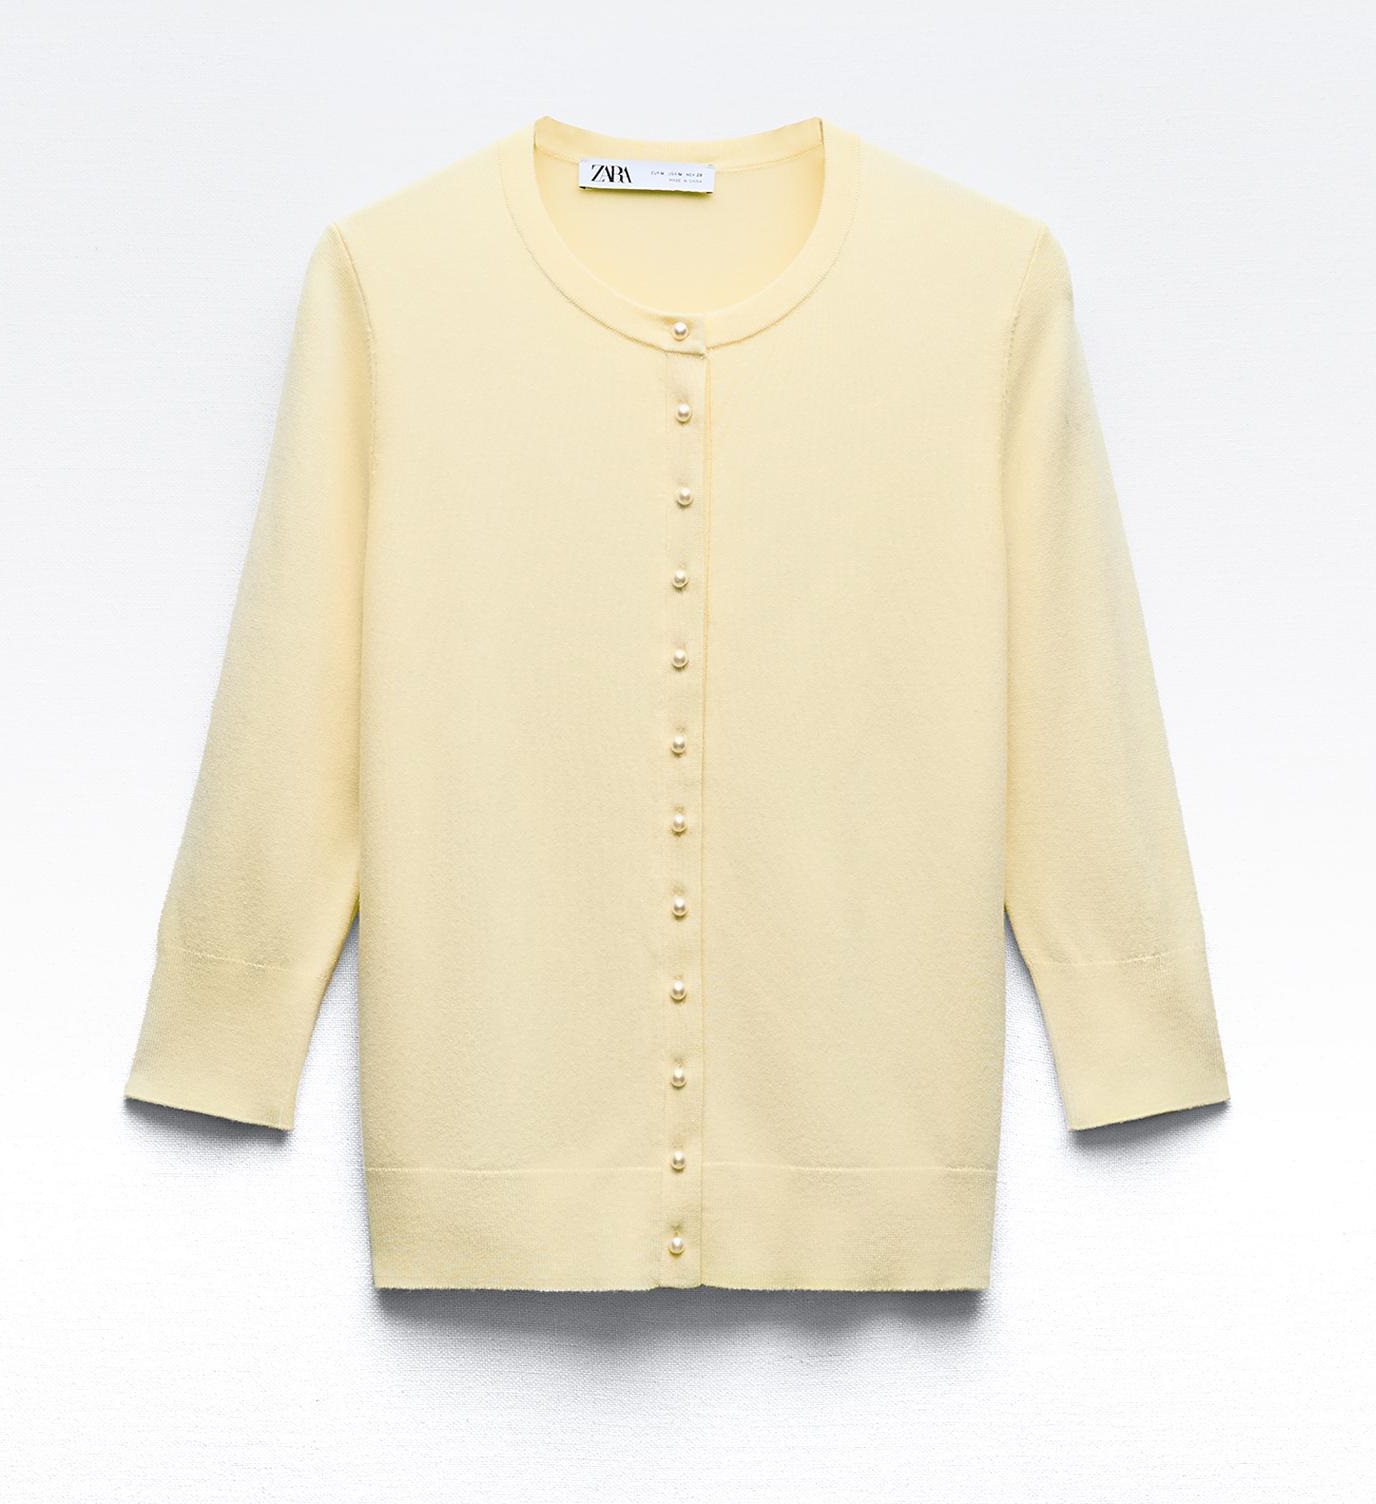 Кардиган Zara Plain Knit With Faux Pearl Buttons, светло-желтый рубашка zara poplin with faux pearl buttons белый